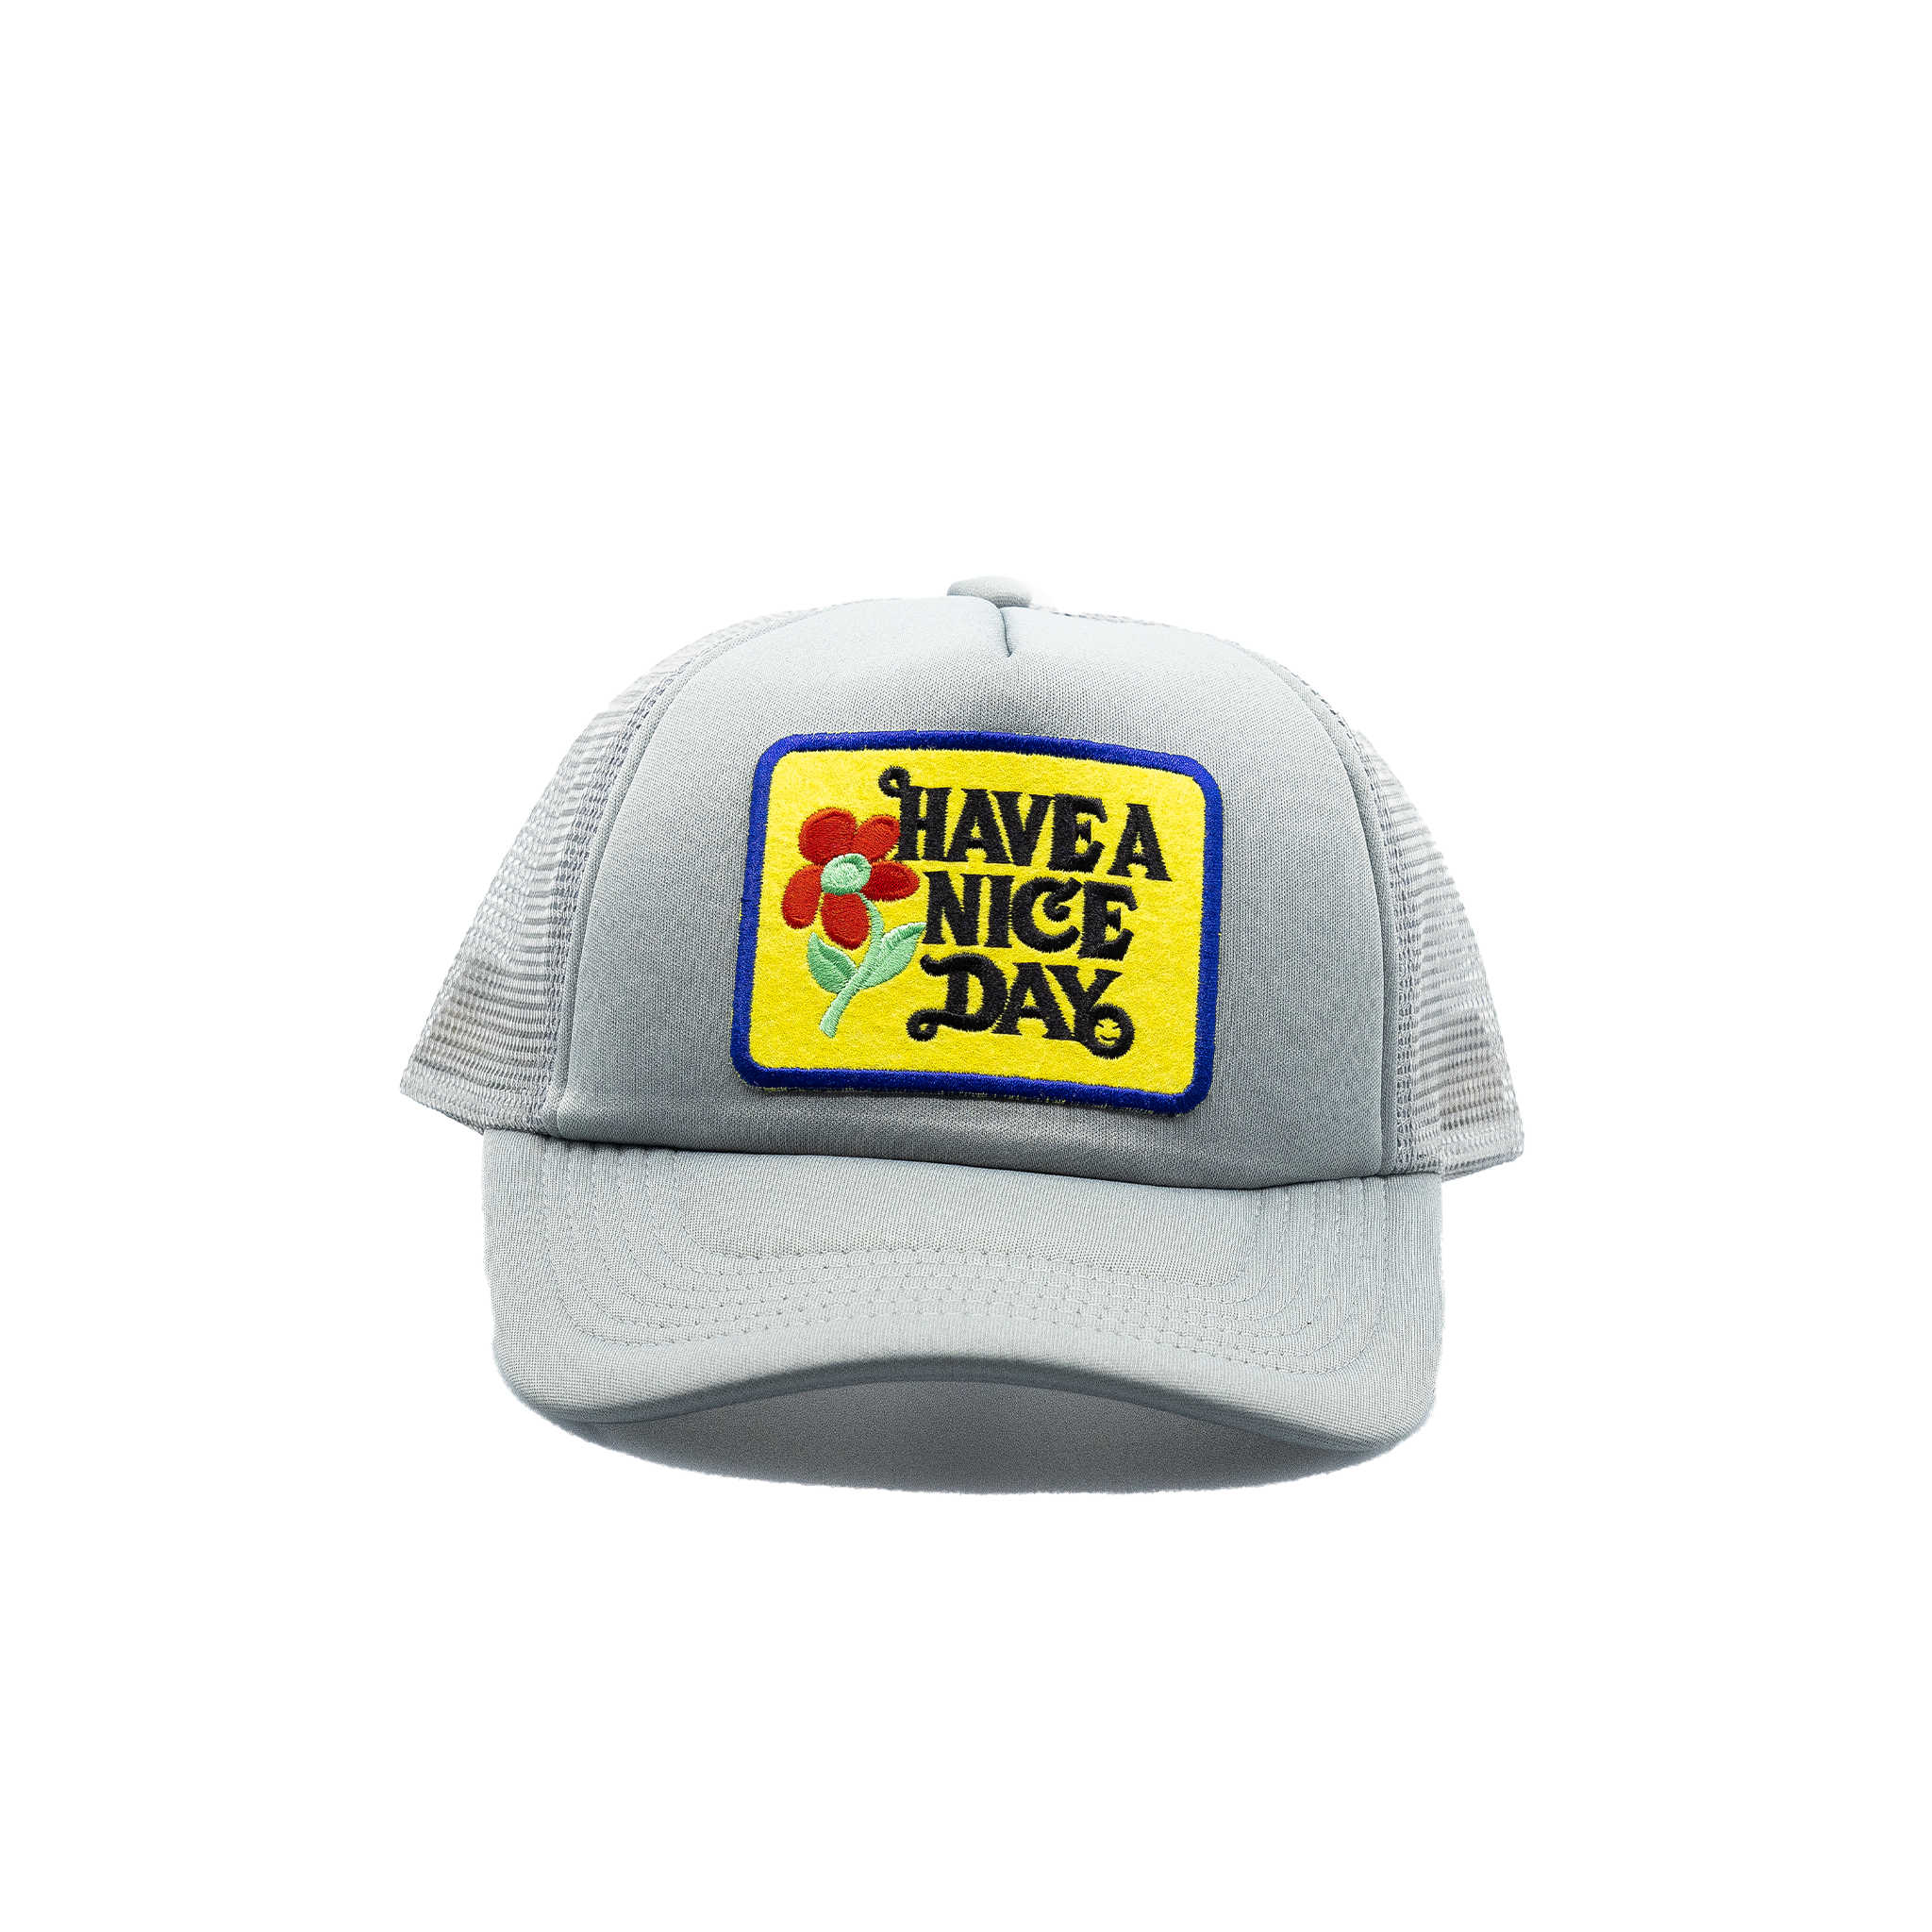 Have a Nice Day Gray All Styles Trucker Hat